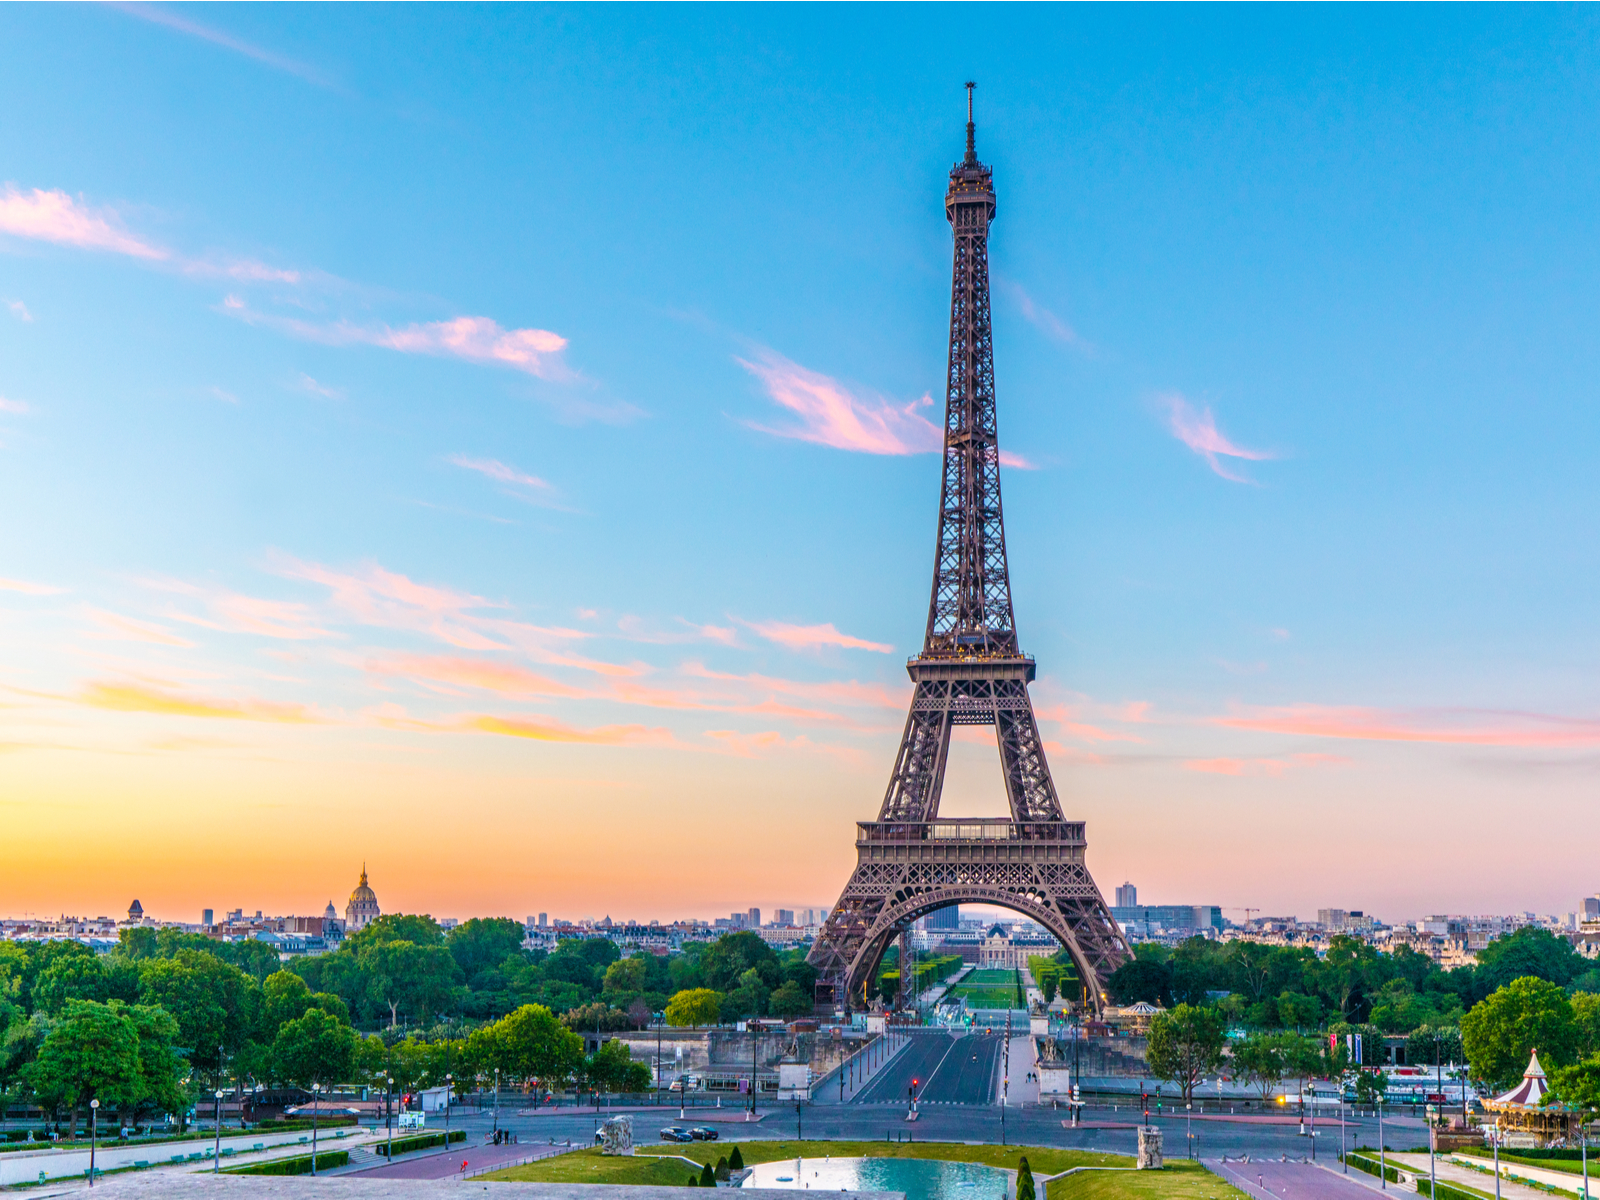 Eiffel tower at sunrise with the River Seine pictured in the background for a piece on the best time to visit Paris